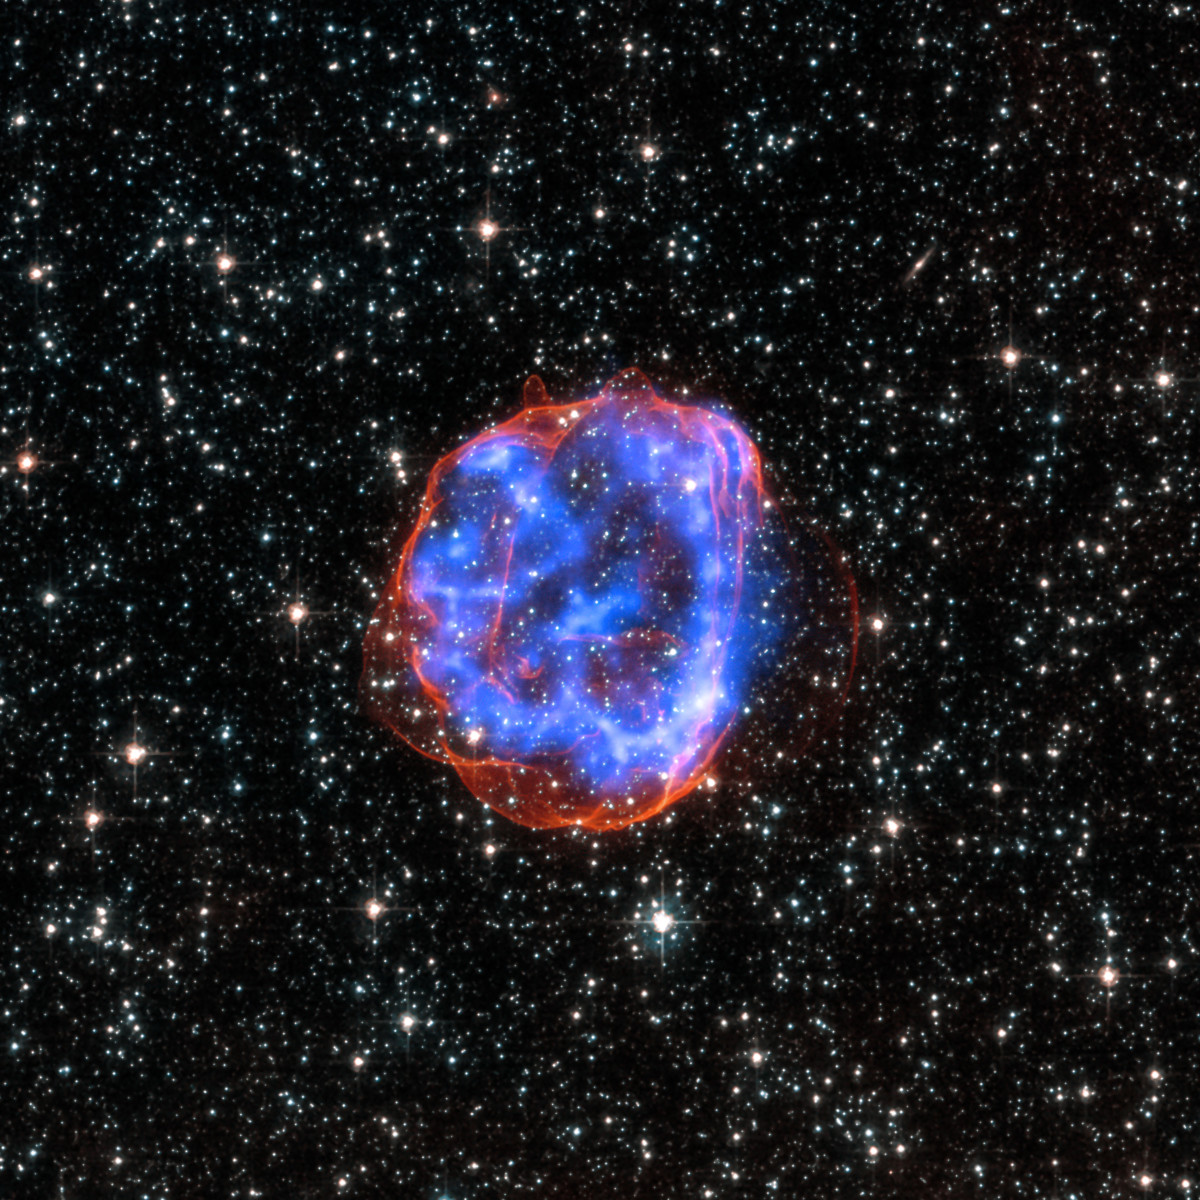 Exploding star (supernova) spewing a vast array of elements into the universe.